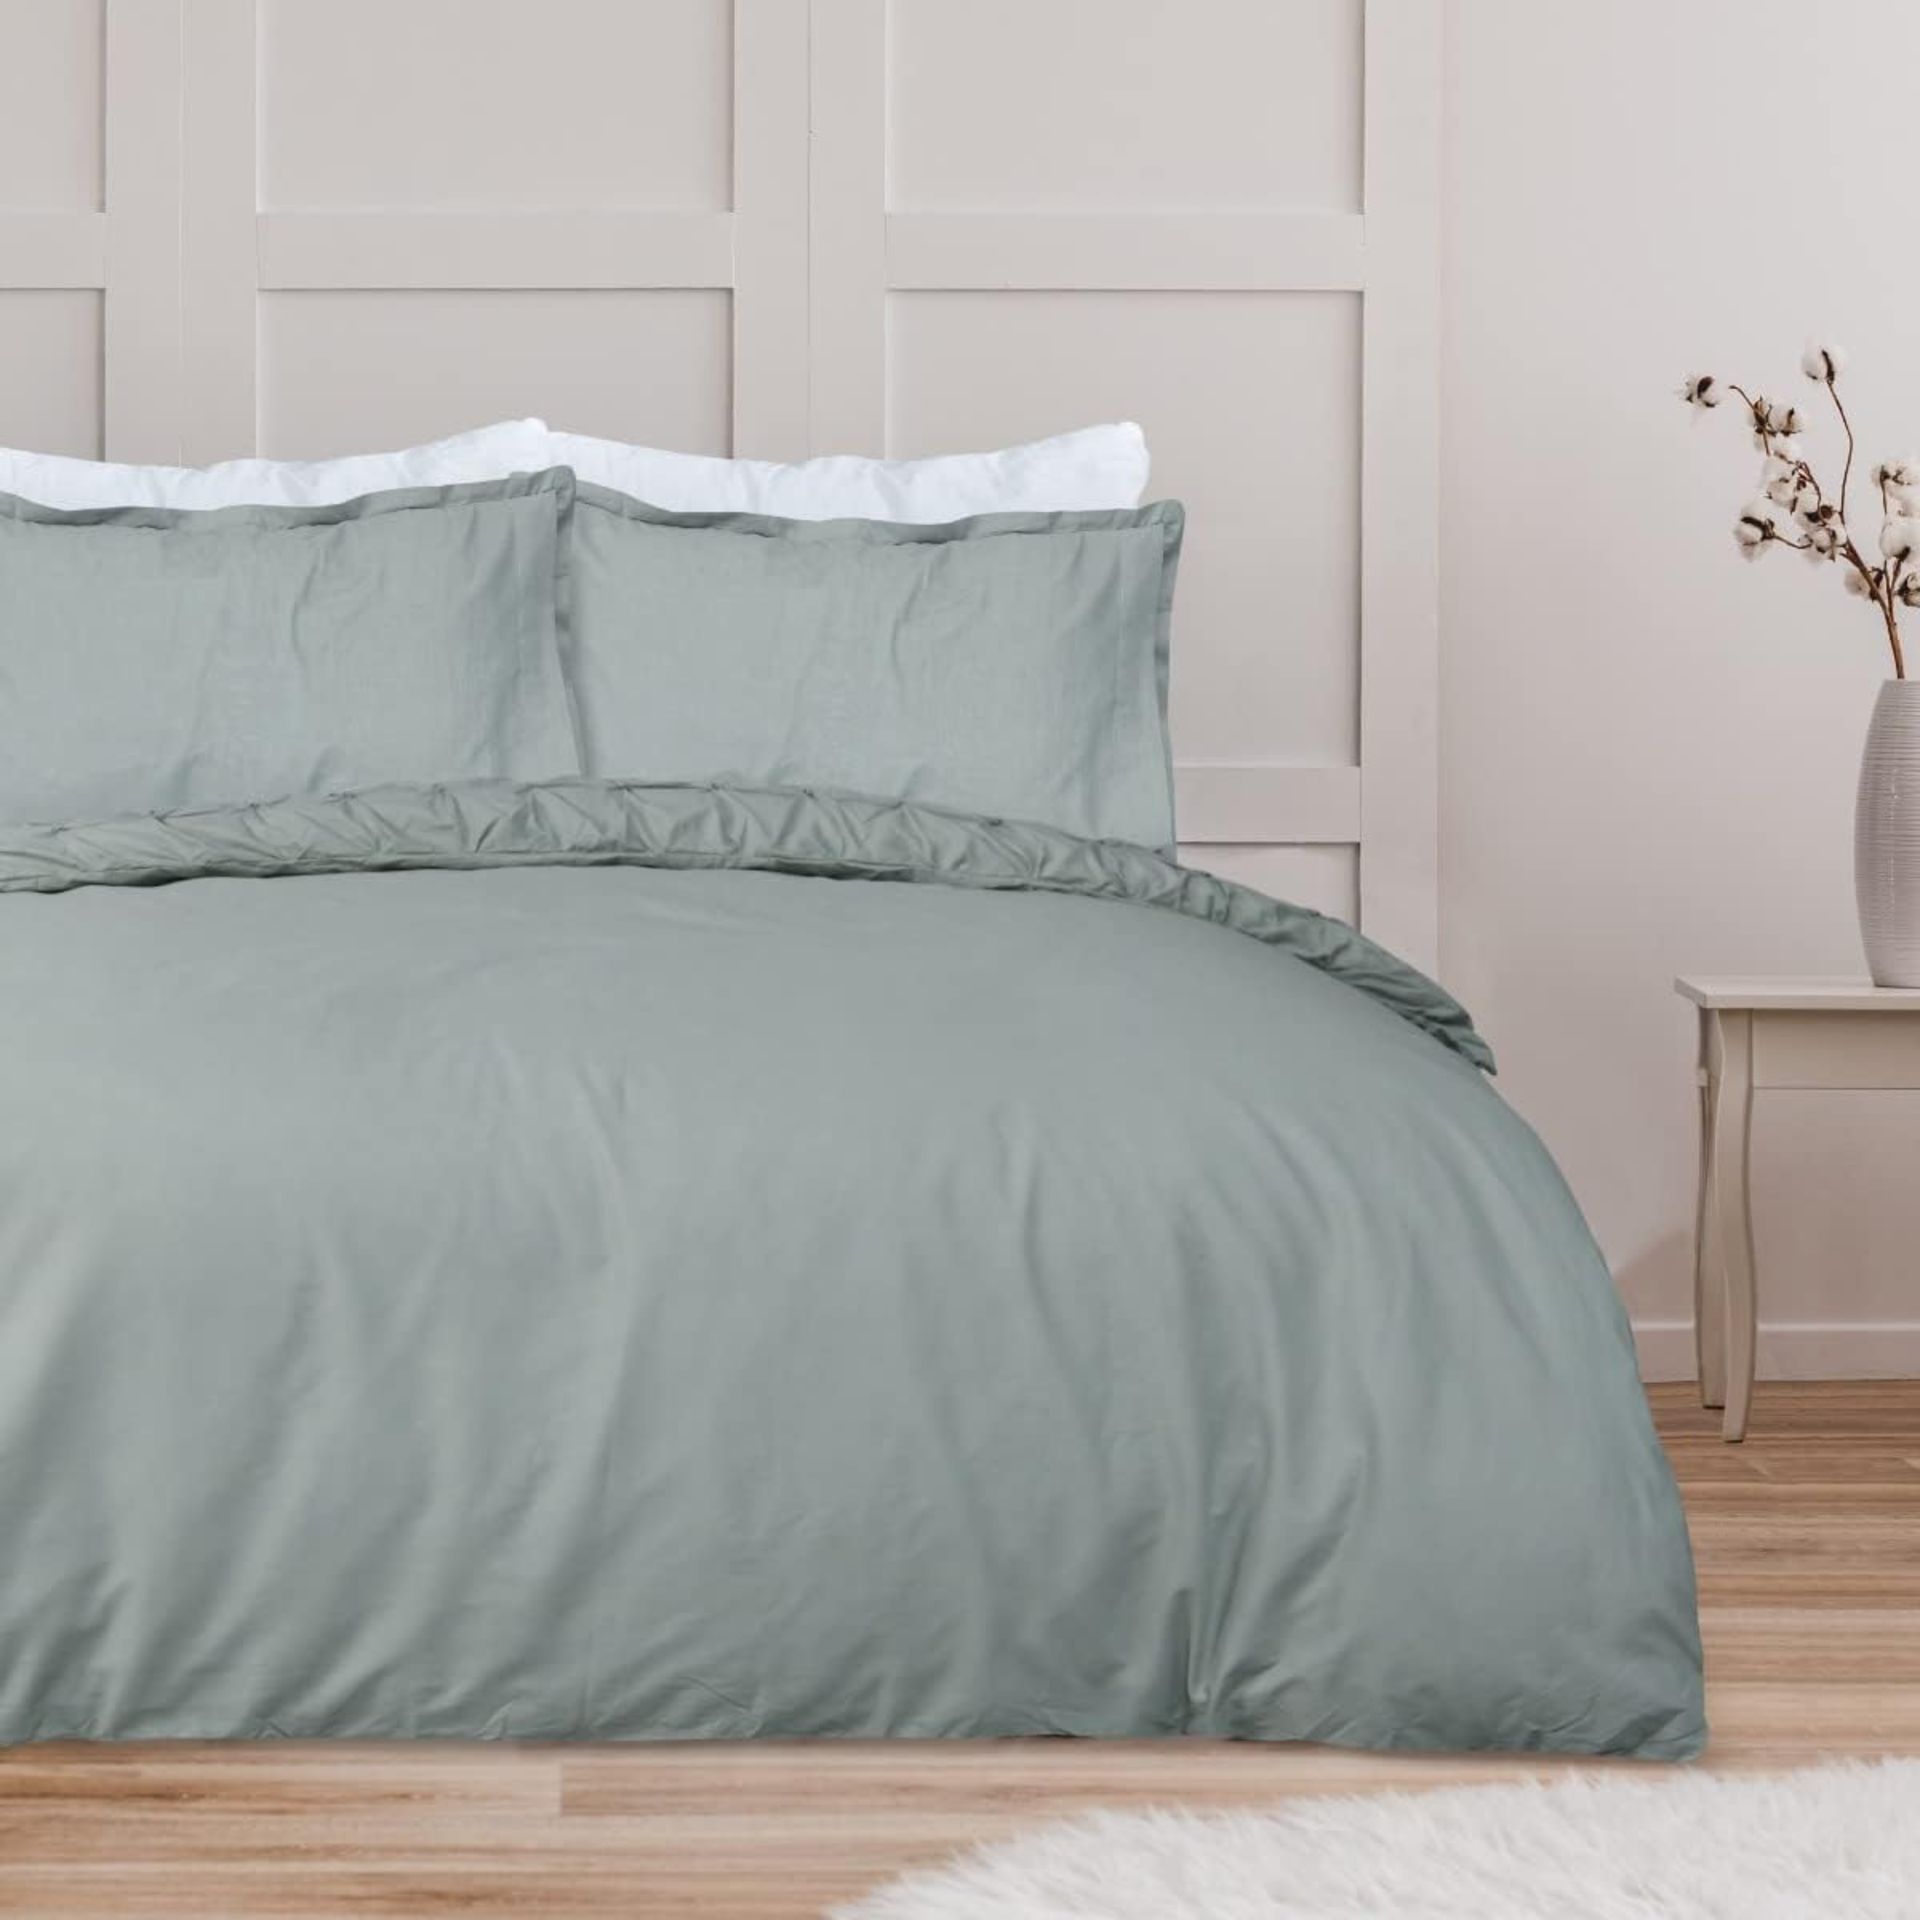 11x NEW & PACKAGED SLEEPDOWN Rouched Easy Care SINGLE Duvet Set - SAGE GREEN. RRP £22.99 EACH. (R7- - Image 4 of 7